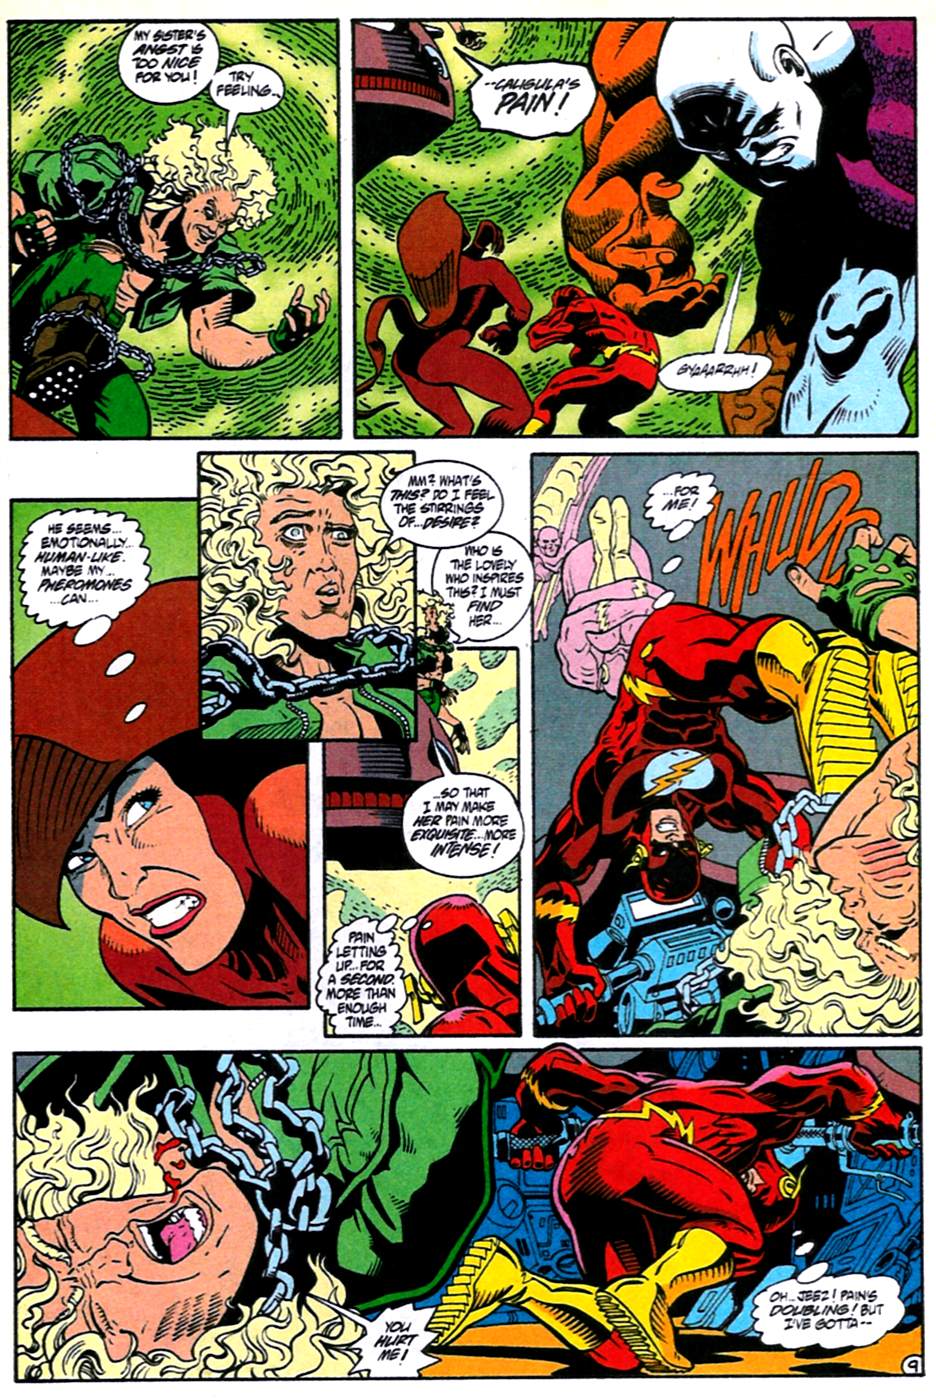 Justice League International (1993) 61 Page 9